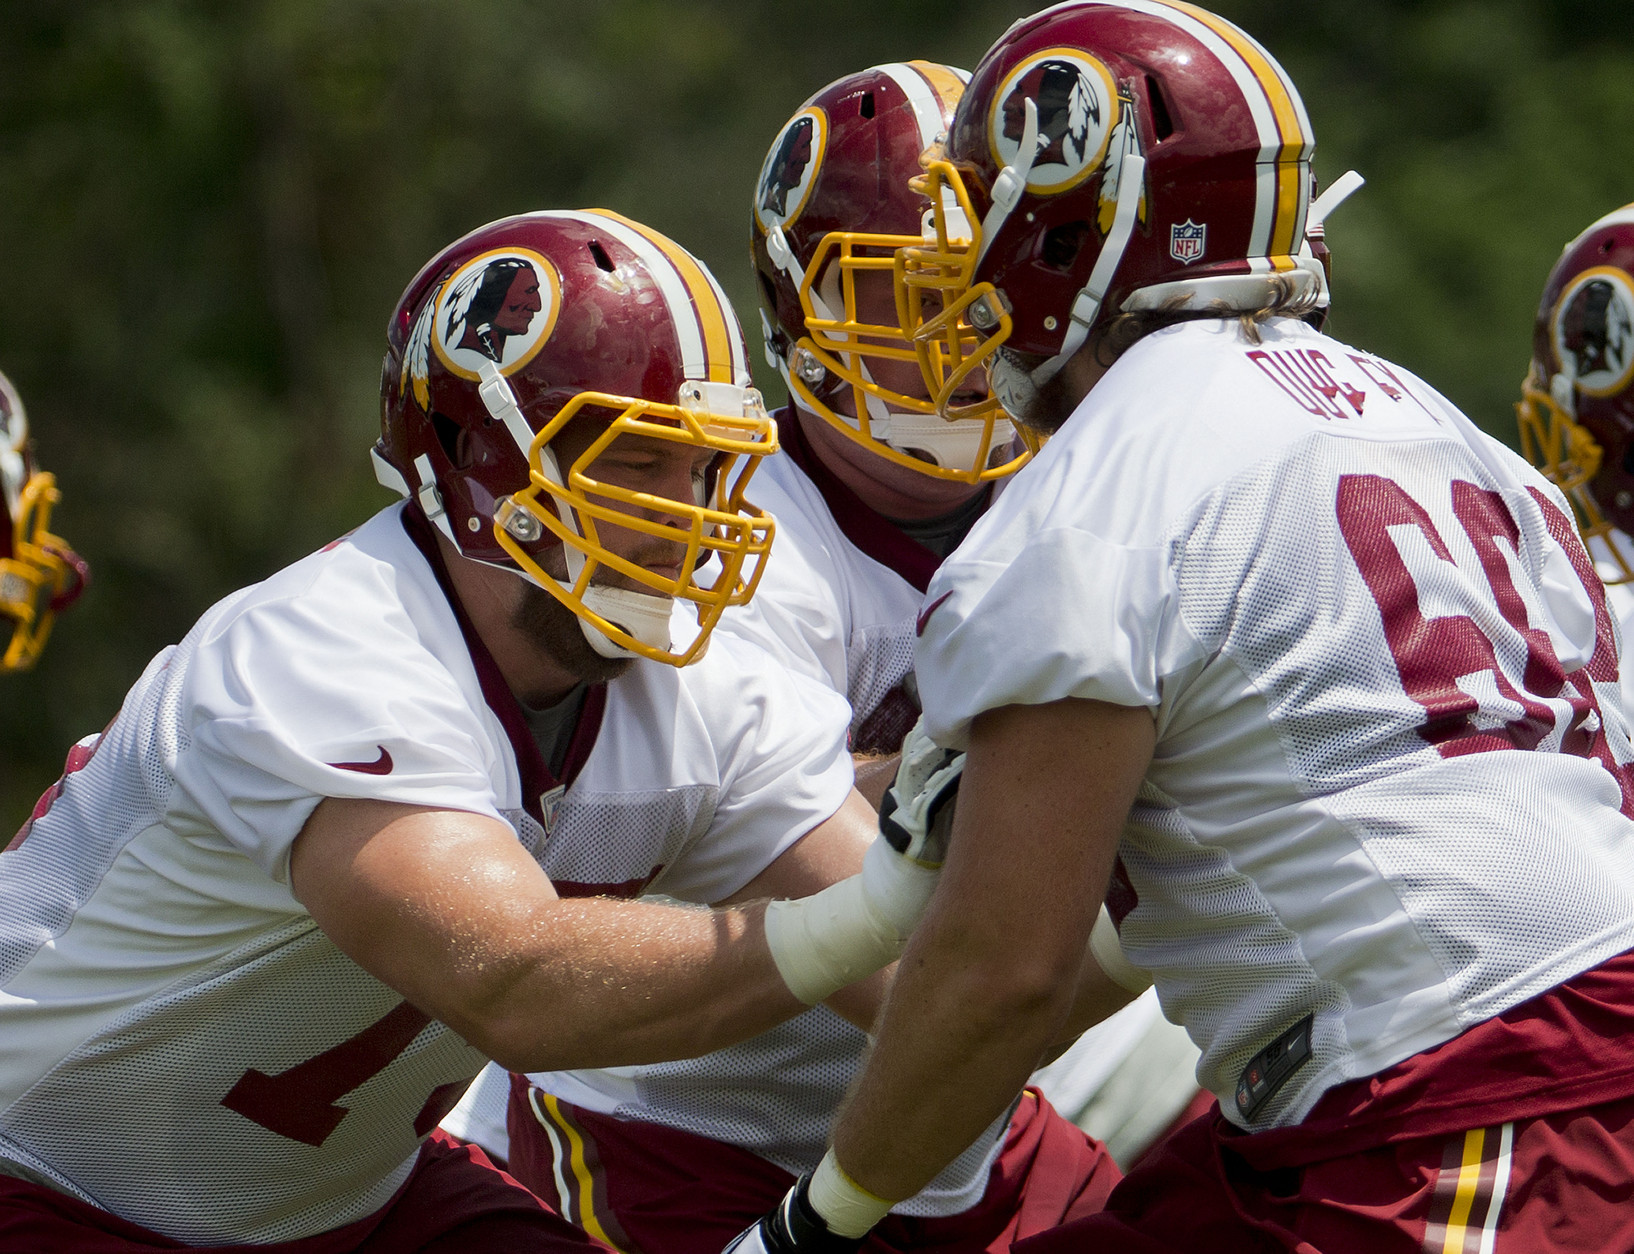 Washington Redskins Brandon Scherff, left, and Bryce Quigley, right, take part in drills during NFL football minicamp at Redskins Park Tuesday, June 16, 2015 in Ashburn, Va. (AP Photo/Pablo Martinez Monsivais)